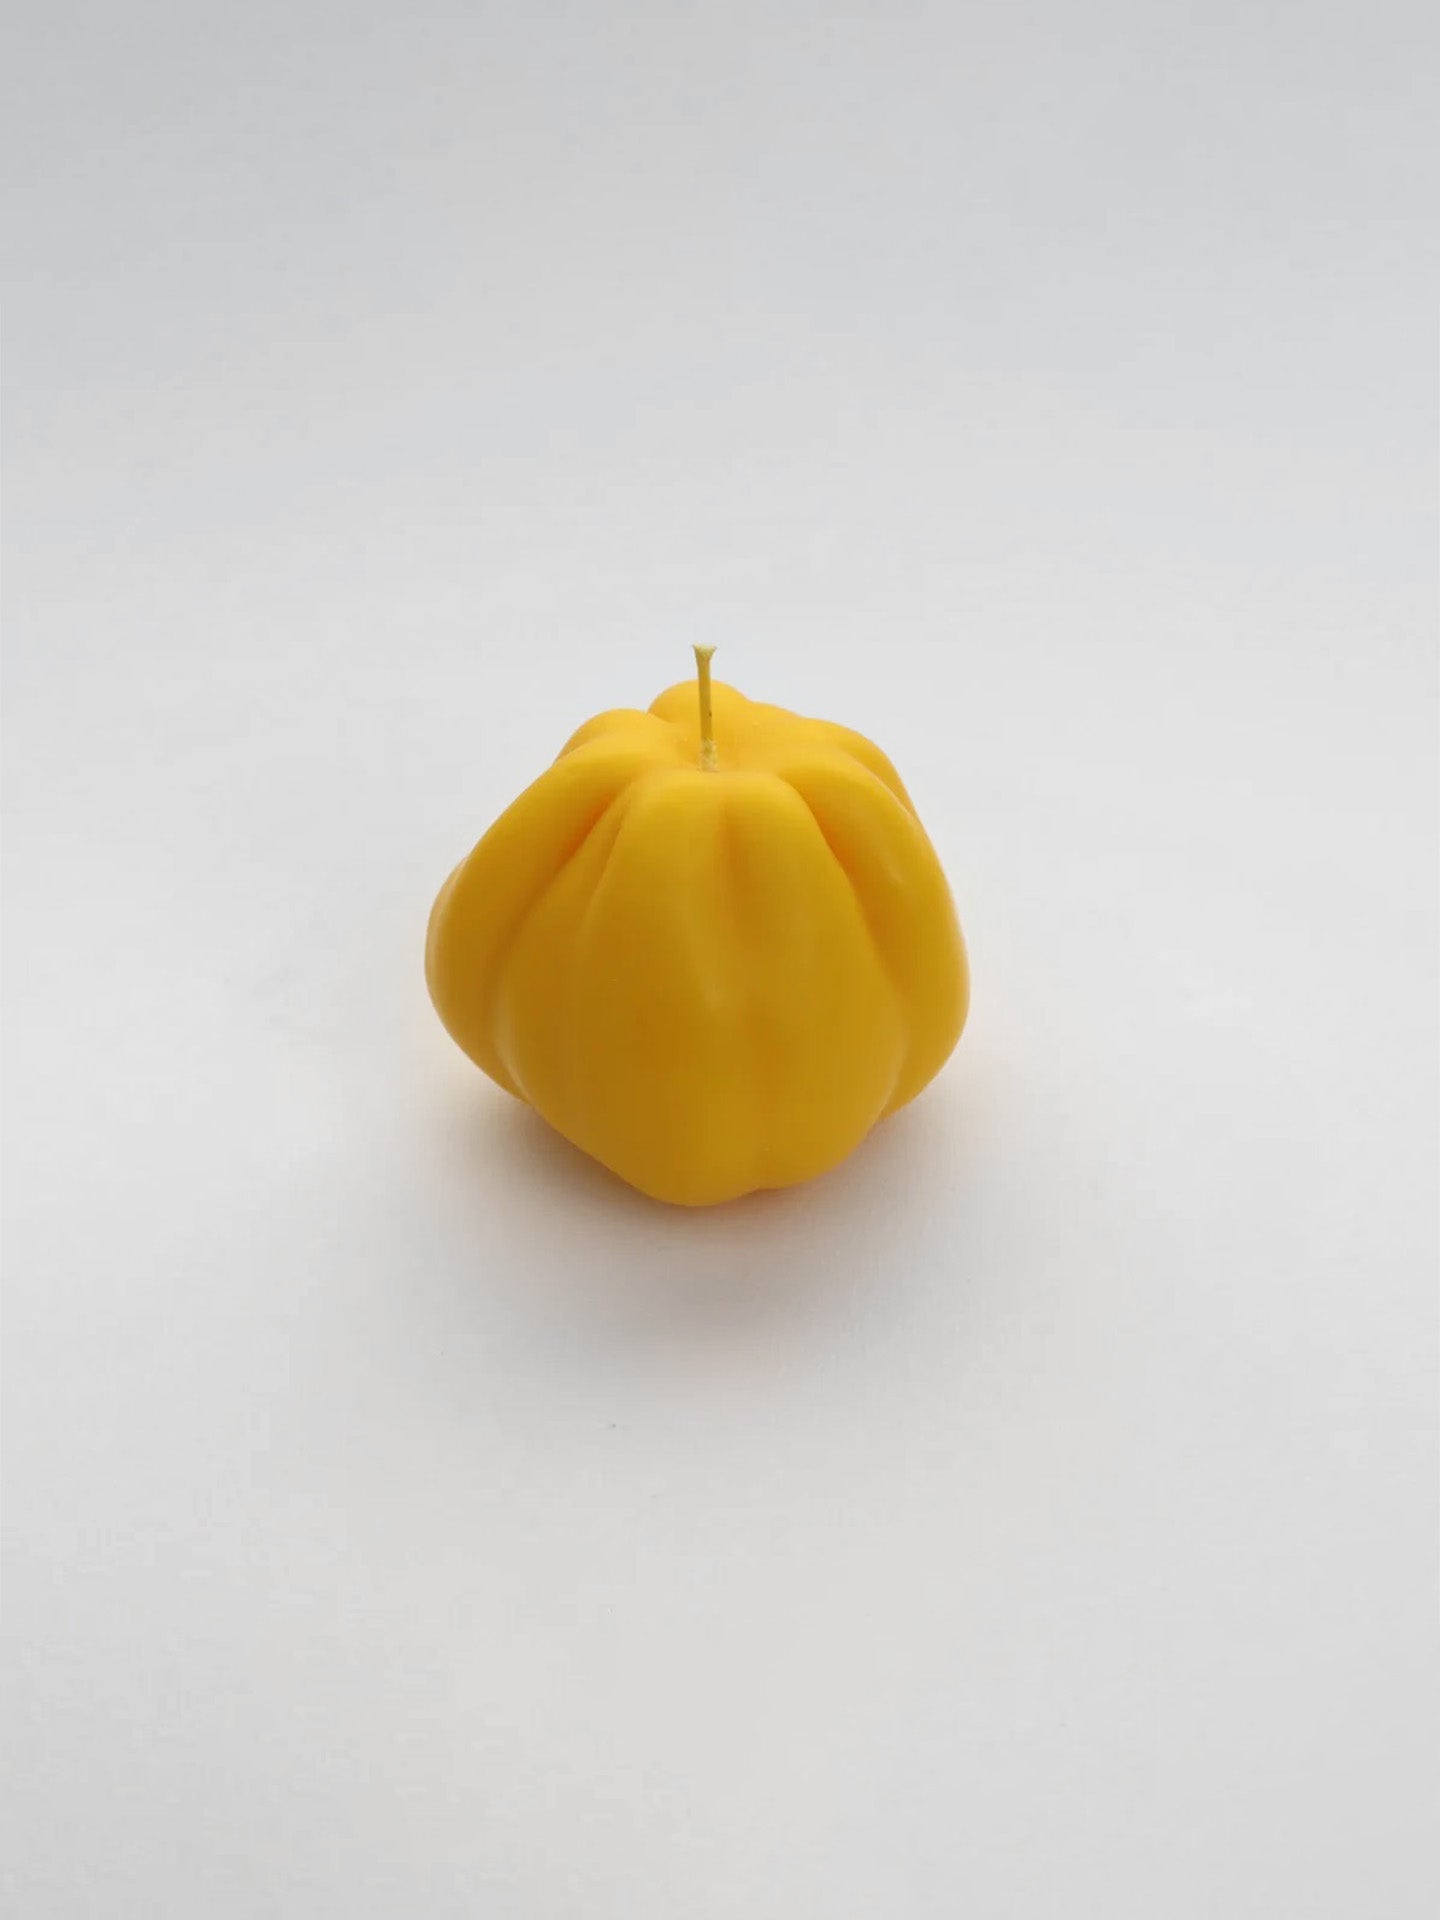 A Yellow Heirloom Tomato Candle – Small by Nonna's Grocer on a white surface.